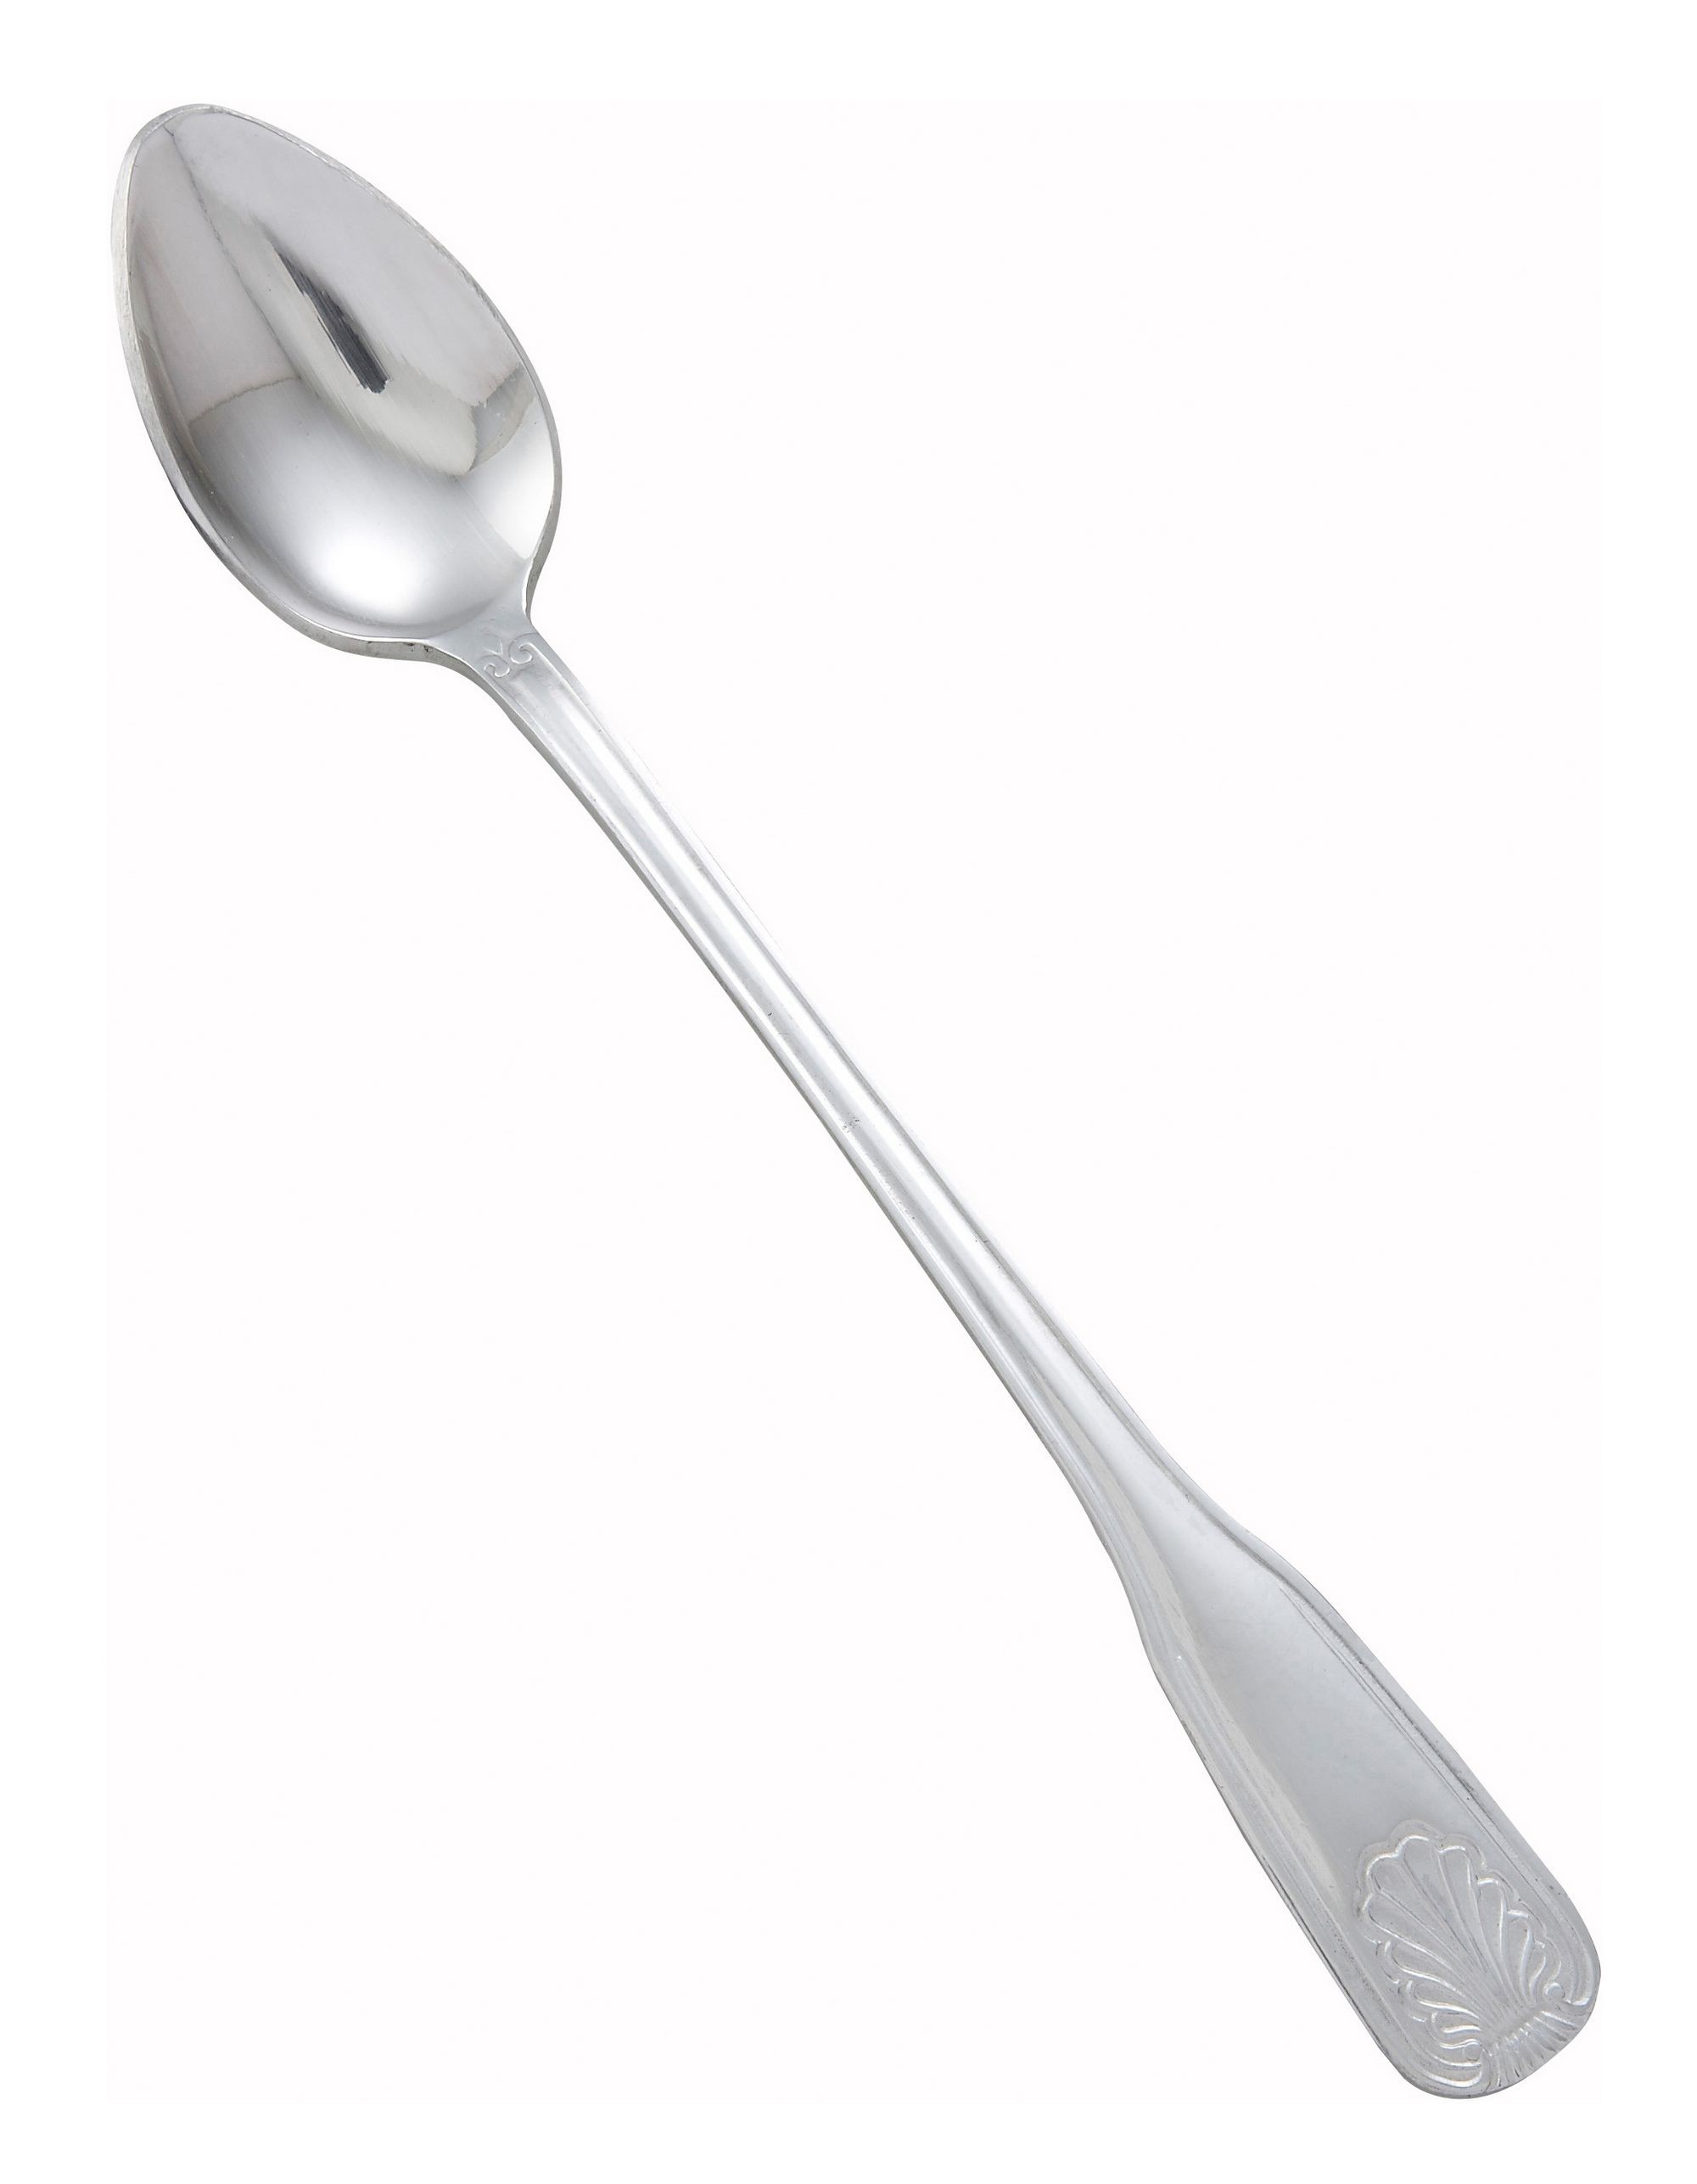 Winco 0006-02 Toulouse Heavy Mirror Finish Stainless Steel Iced Teaspoon (12/Pack)